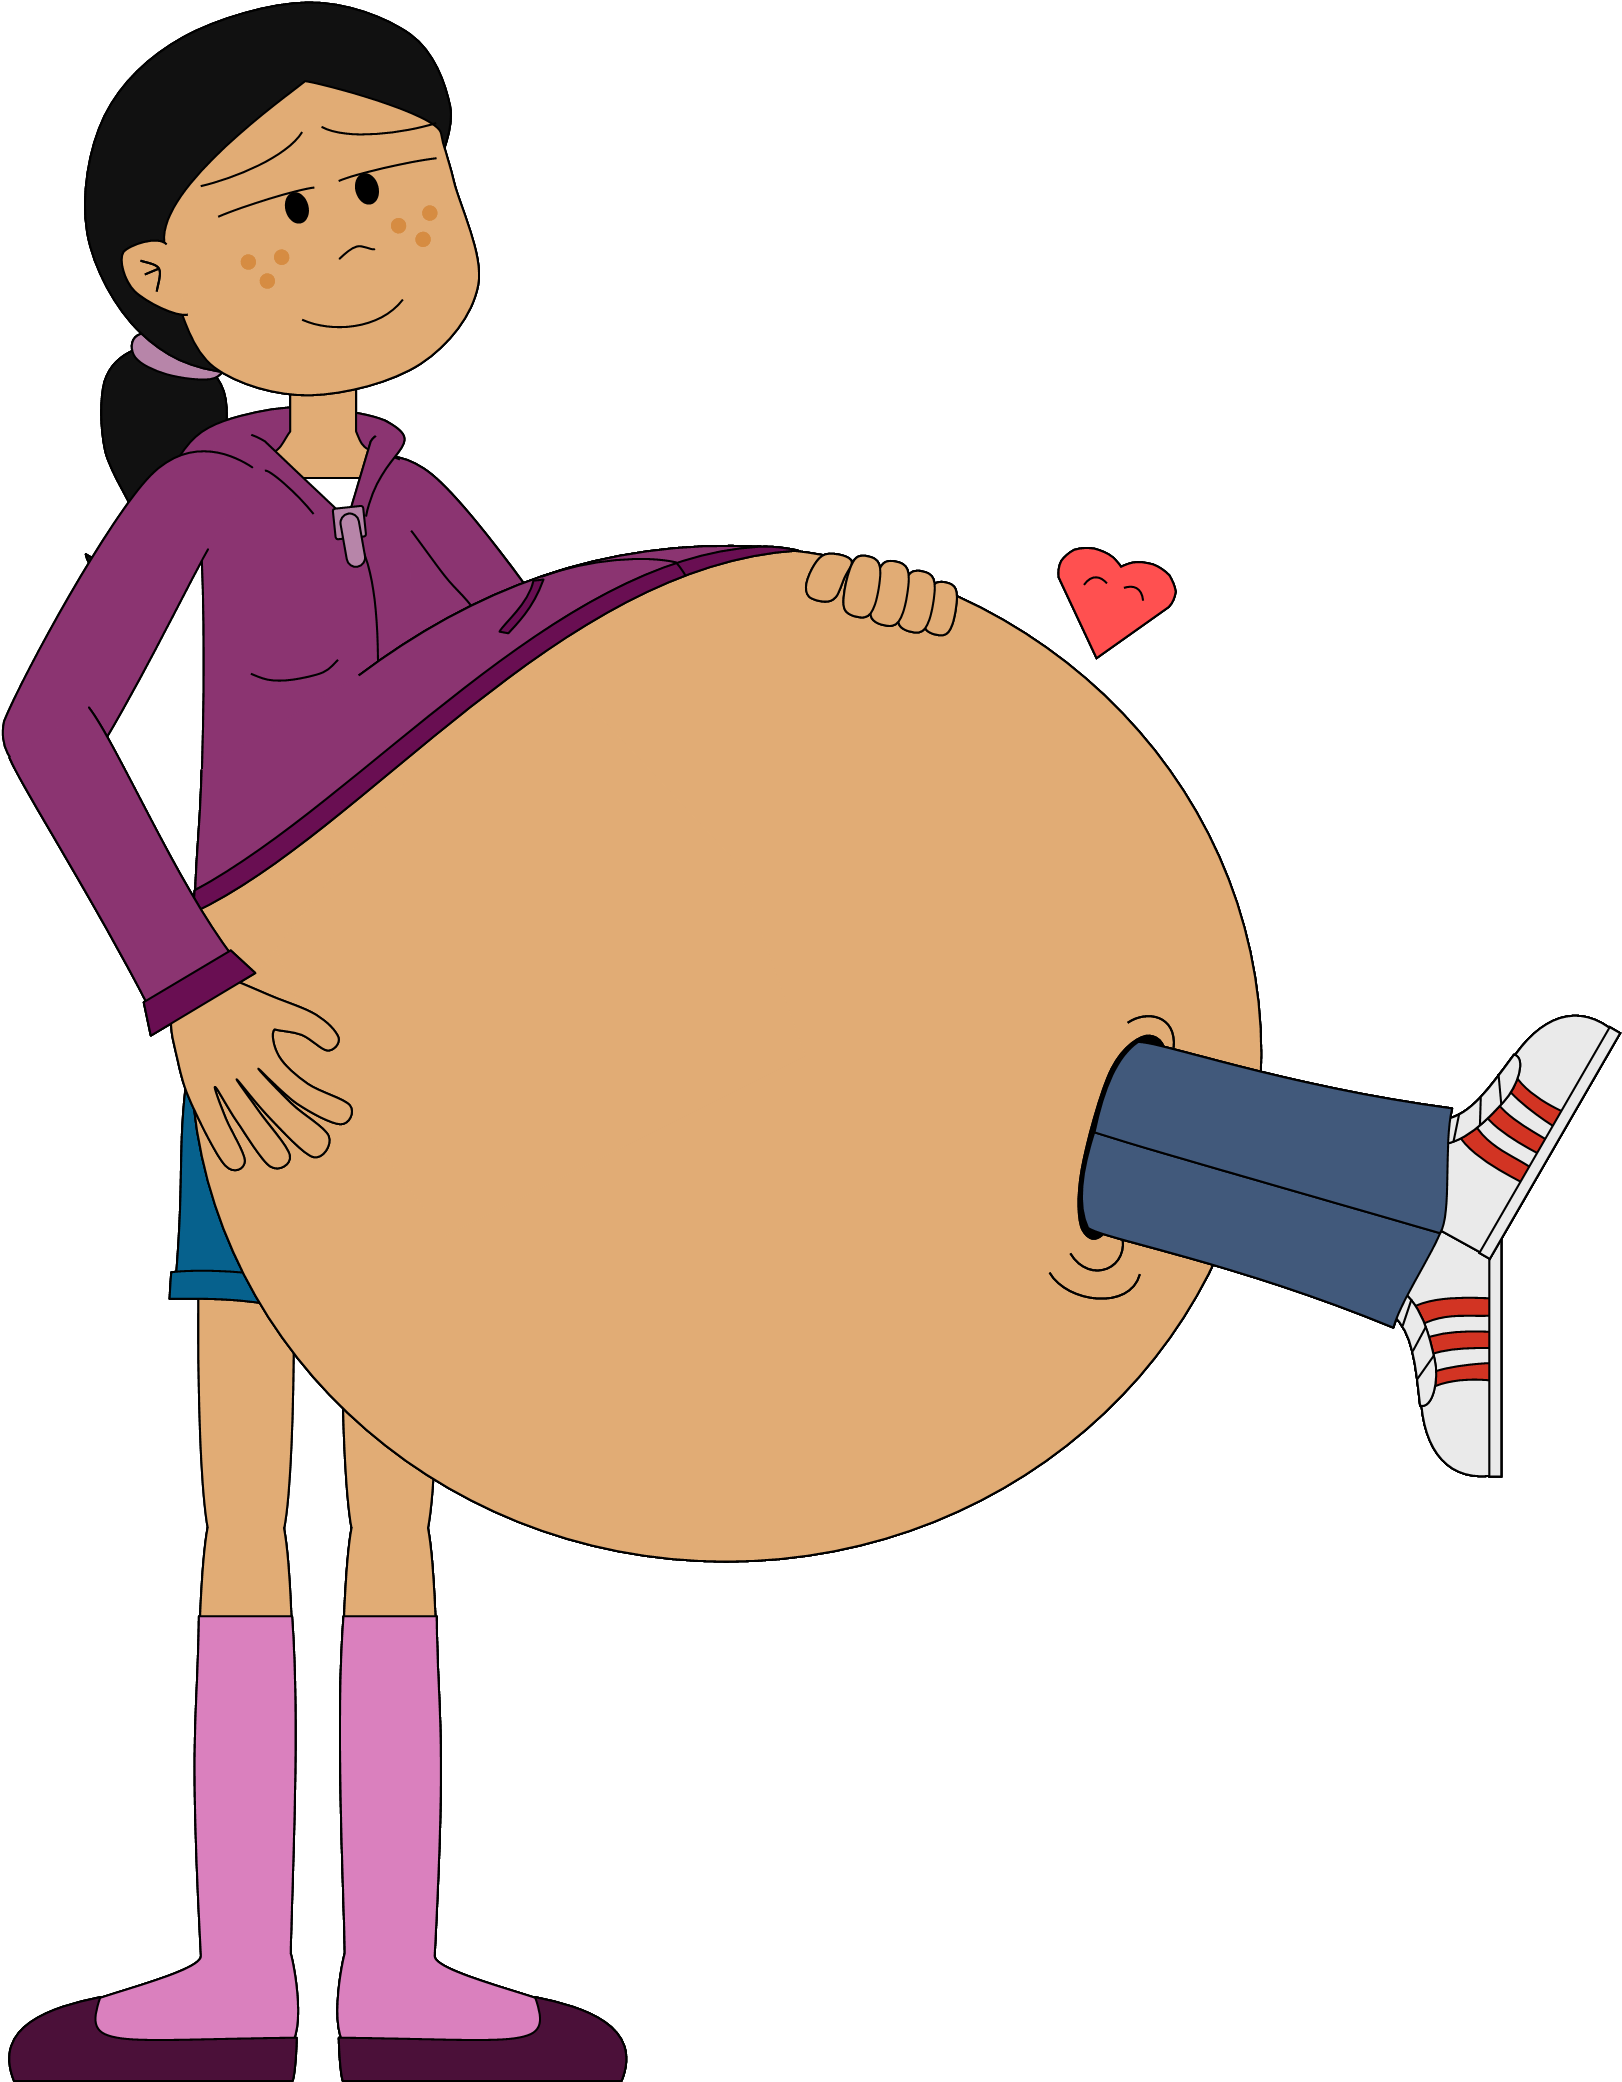 Download and share clipart about Ronnie Anne Navel Vore By Angry-signs - An...